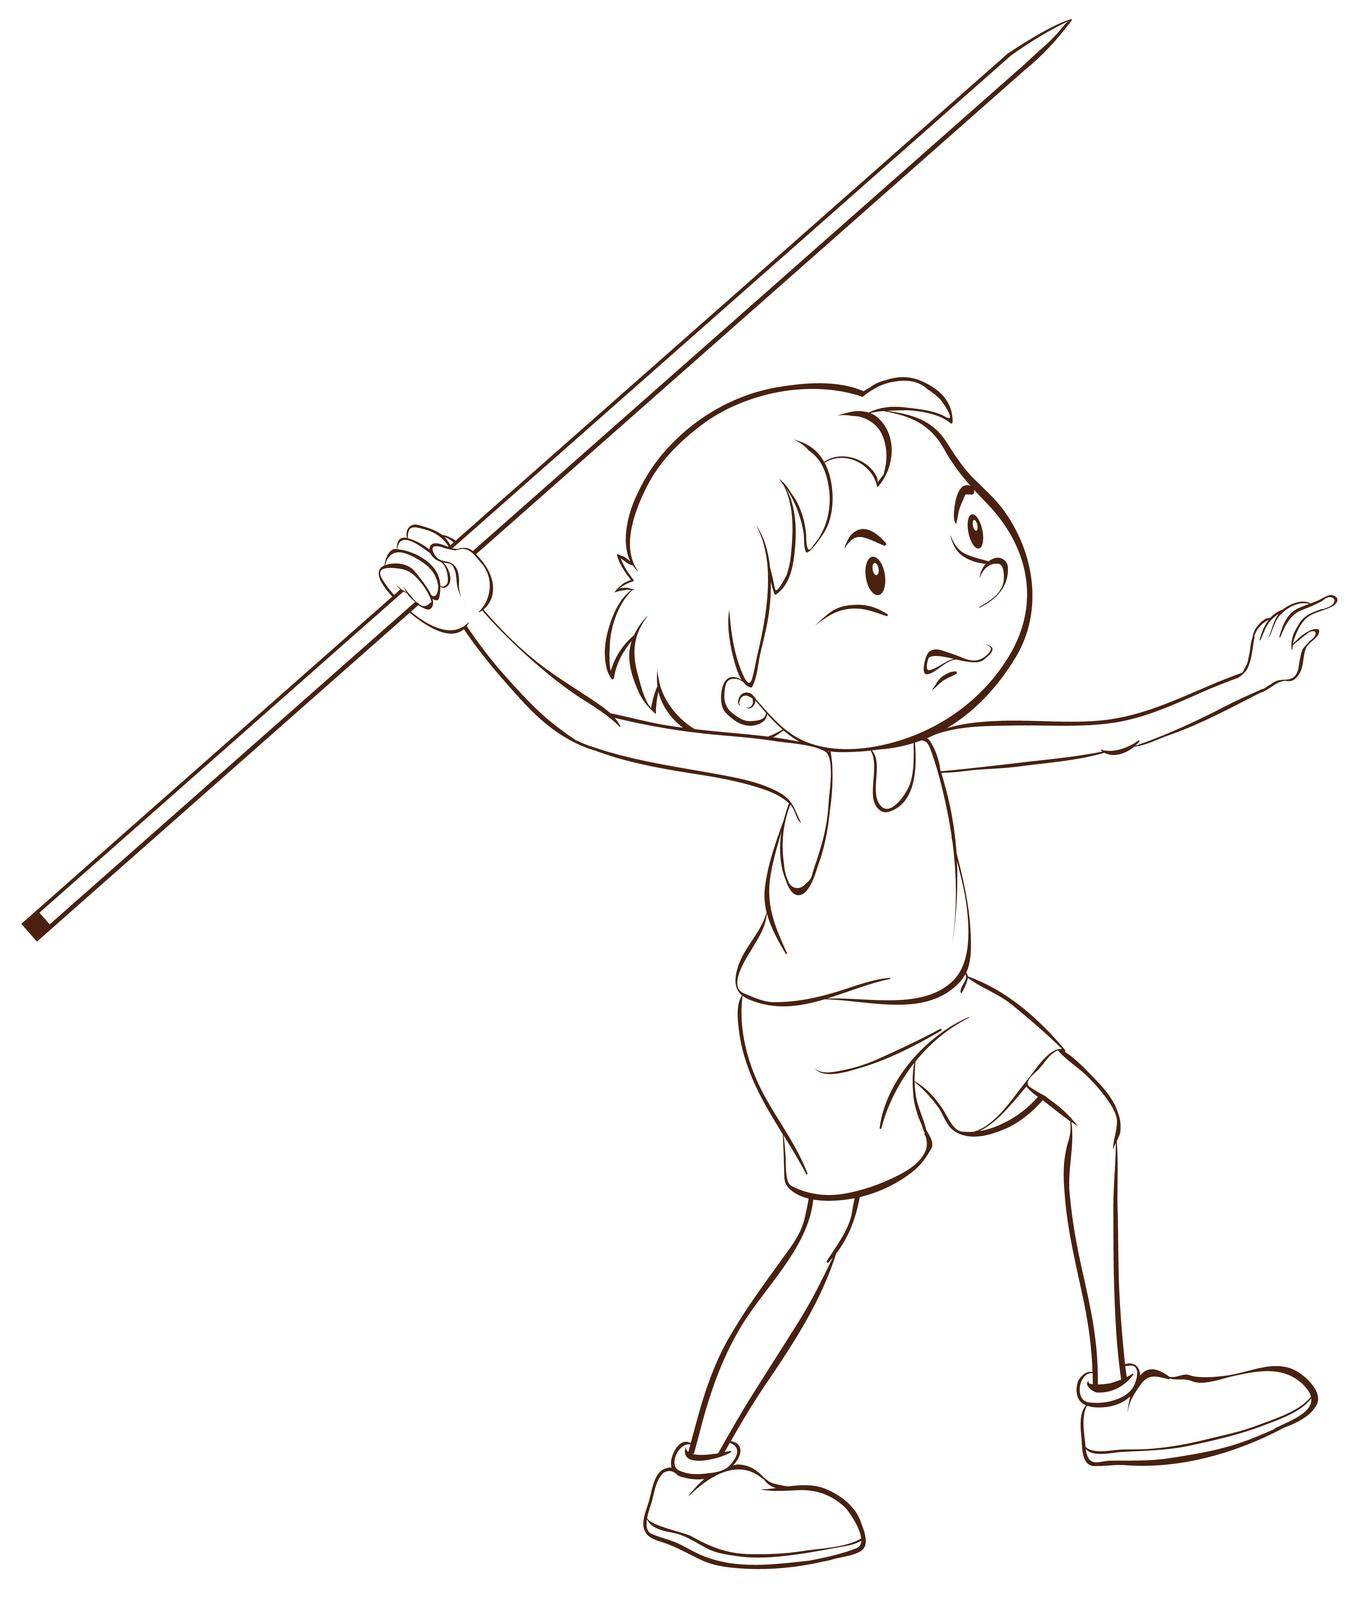 Illustration of a boy doing athletic